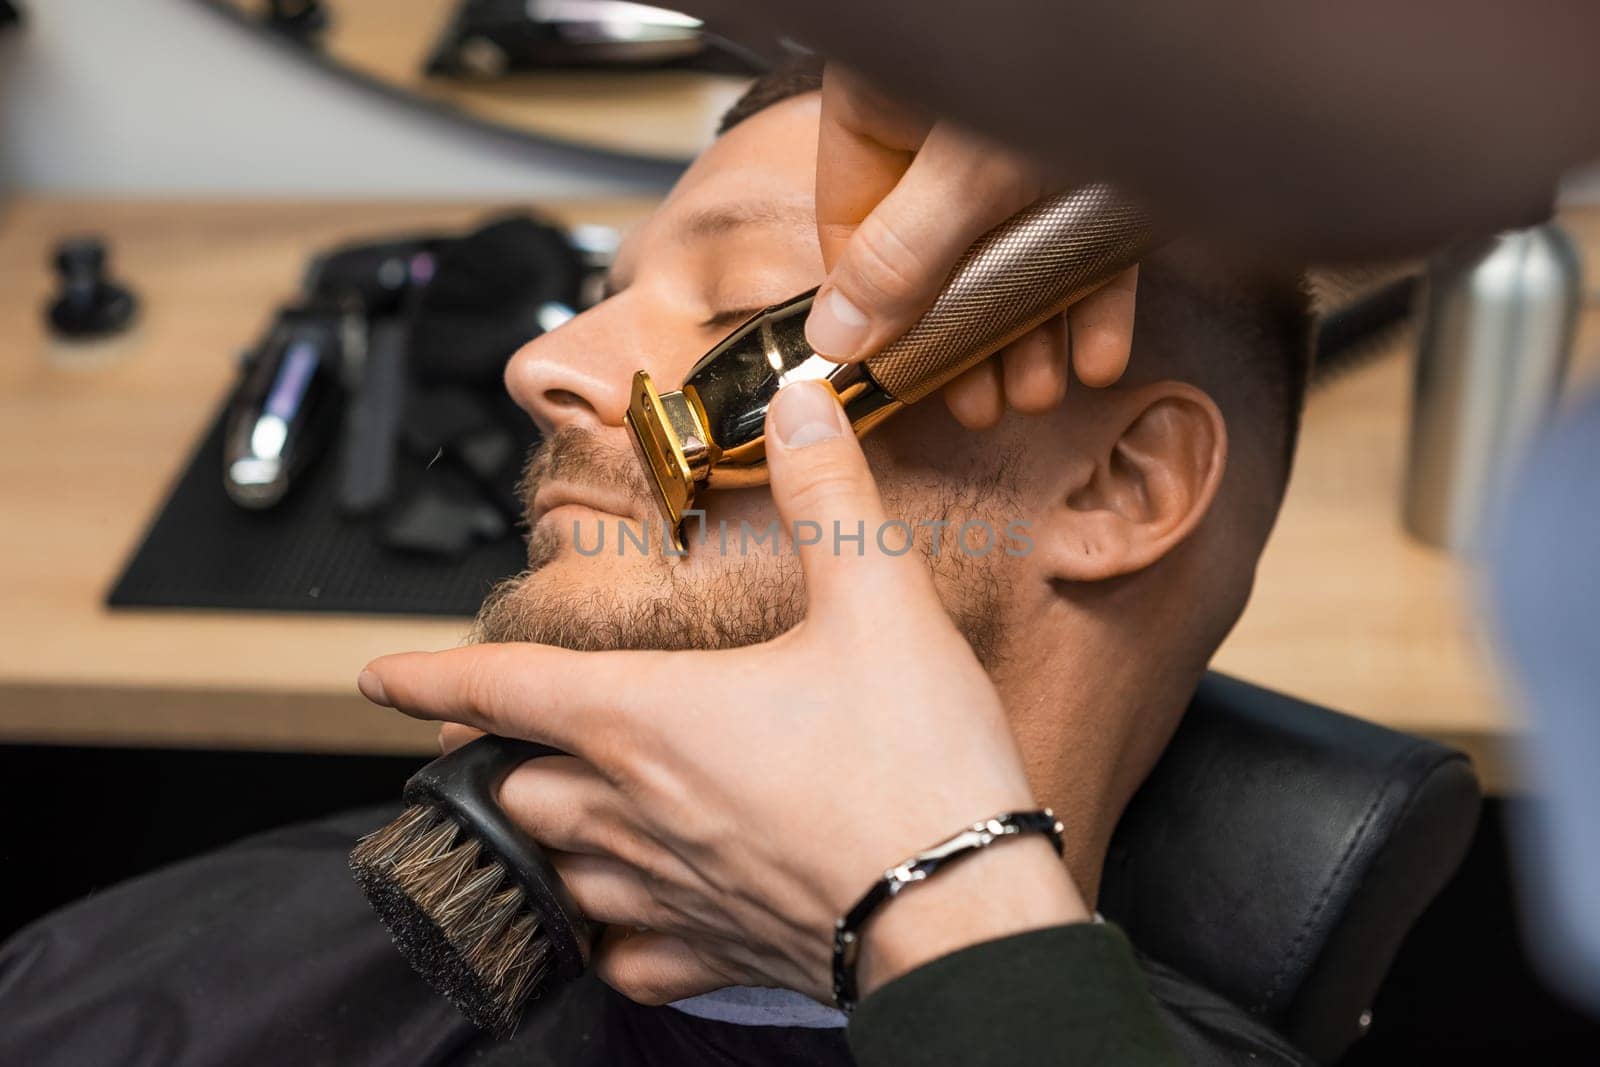 Barber maneuvers the trimmer along the clients cheek, carefully cutting and defining the beard